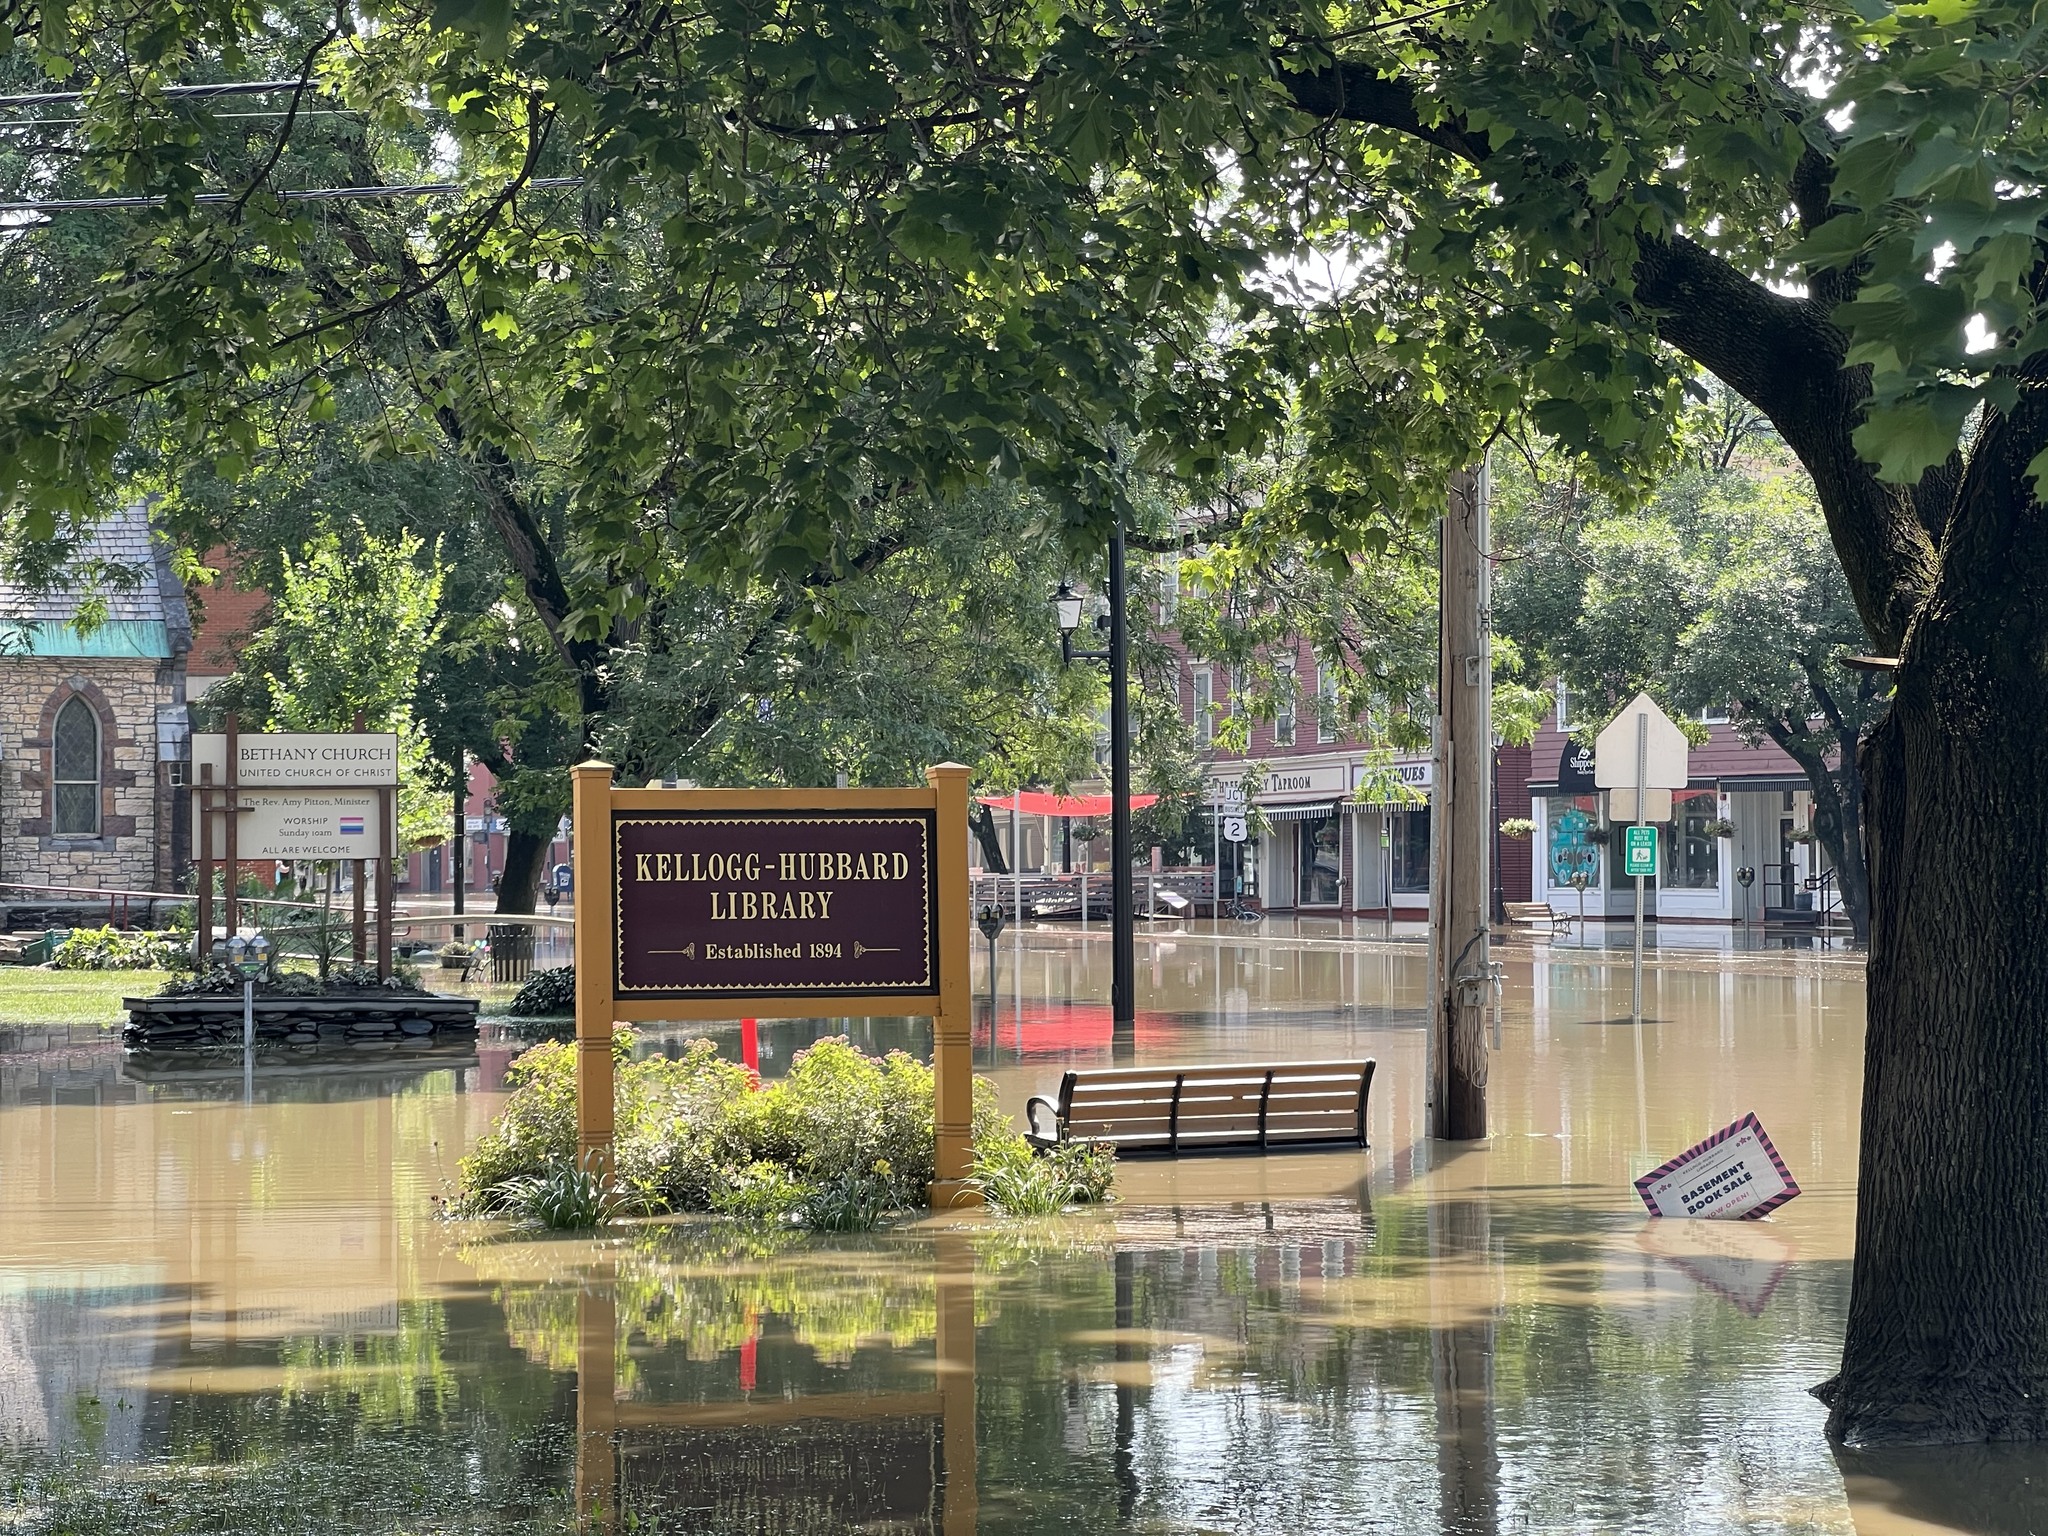 Flooded streets surround the Kellogg-Hubbard Library sign